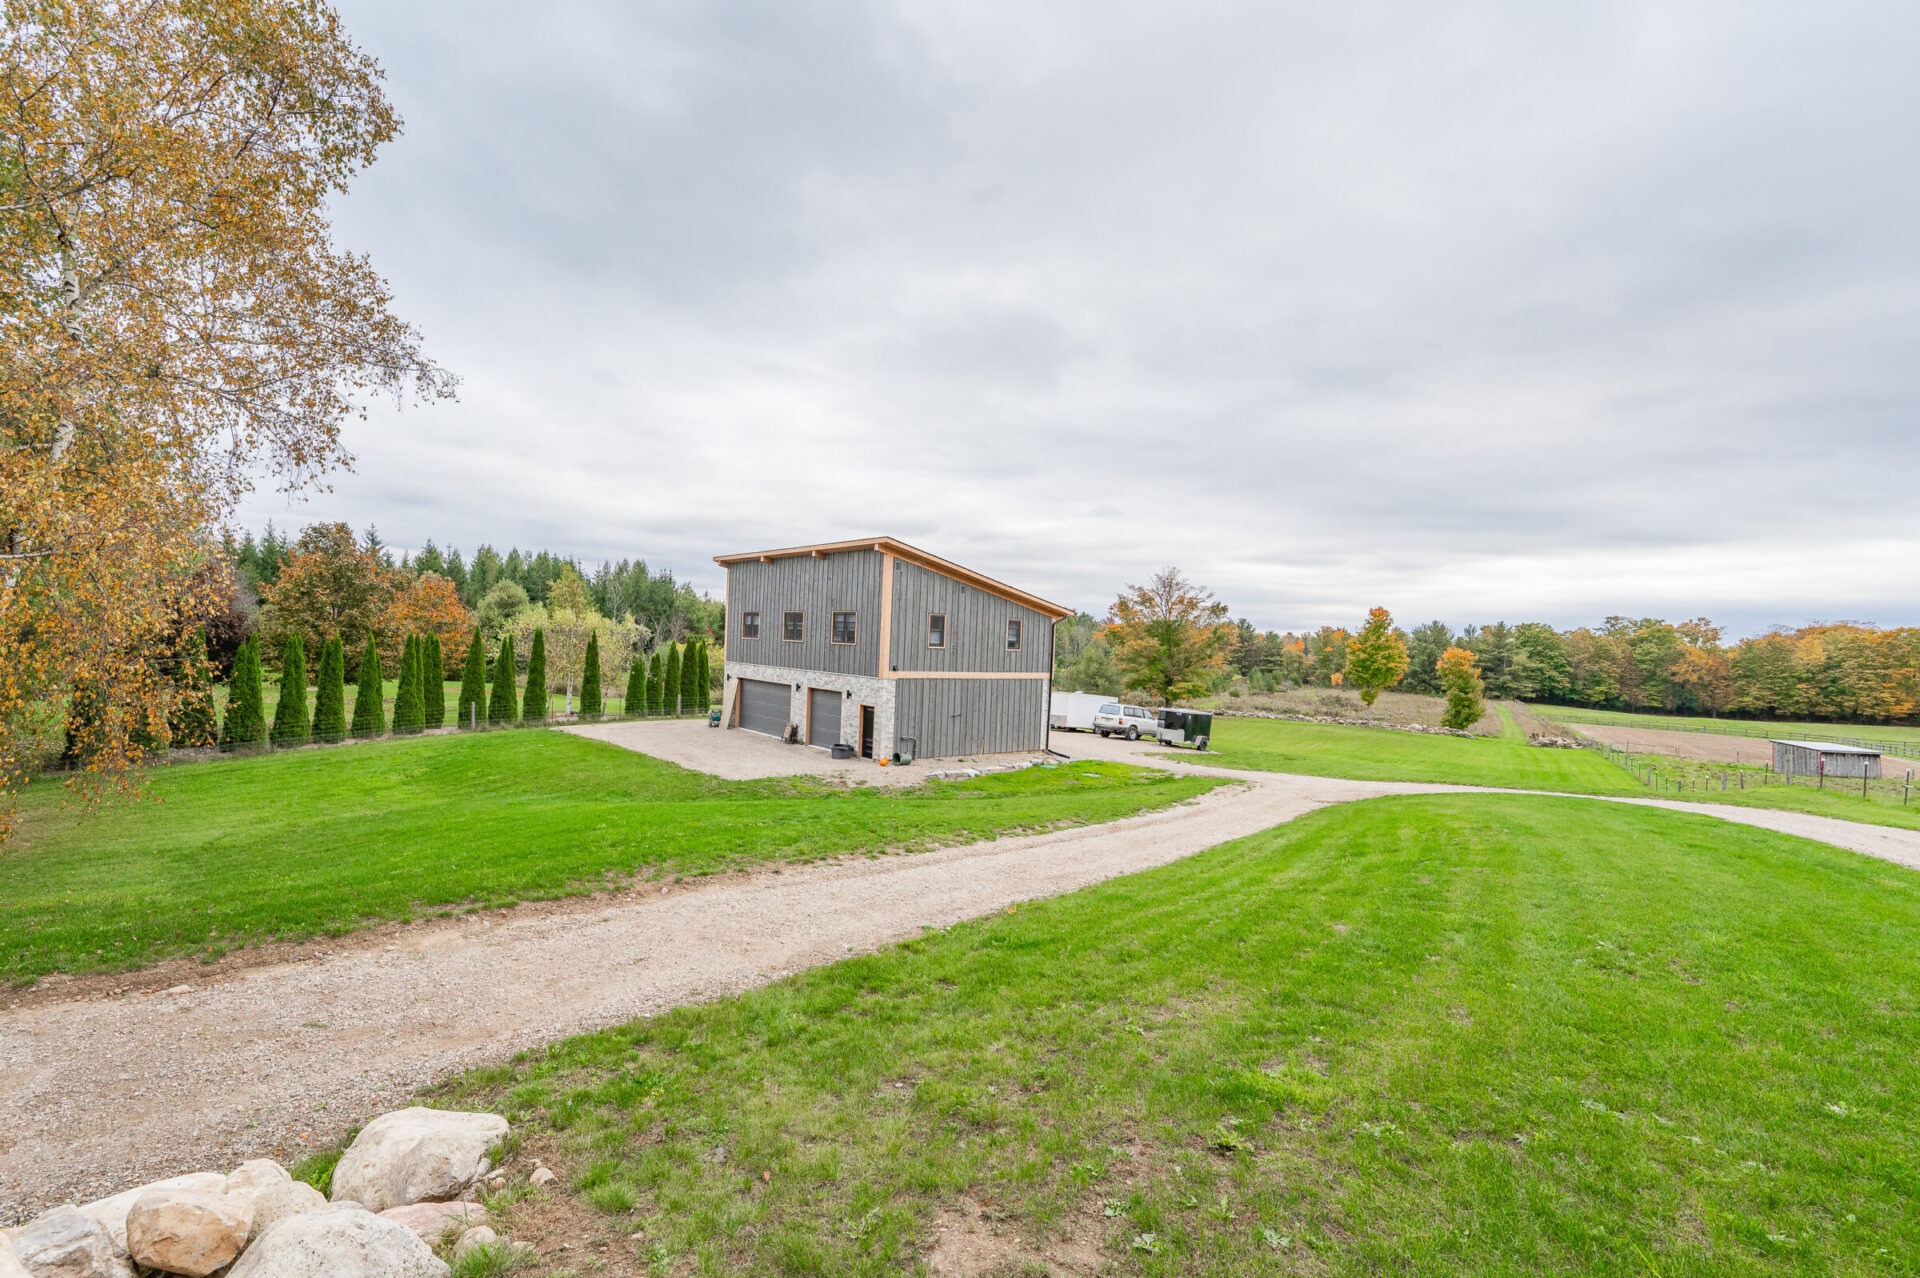 This is a rural scene with a large, two-story wooden building, a well-manicured lawn, gravel driveway, and neatly aligned trees under a cloudy sky.